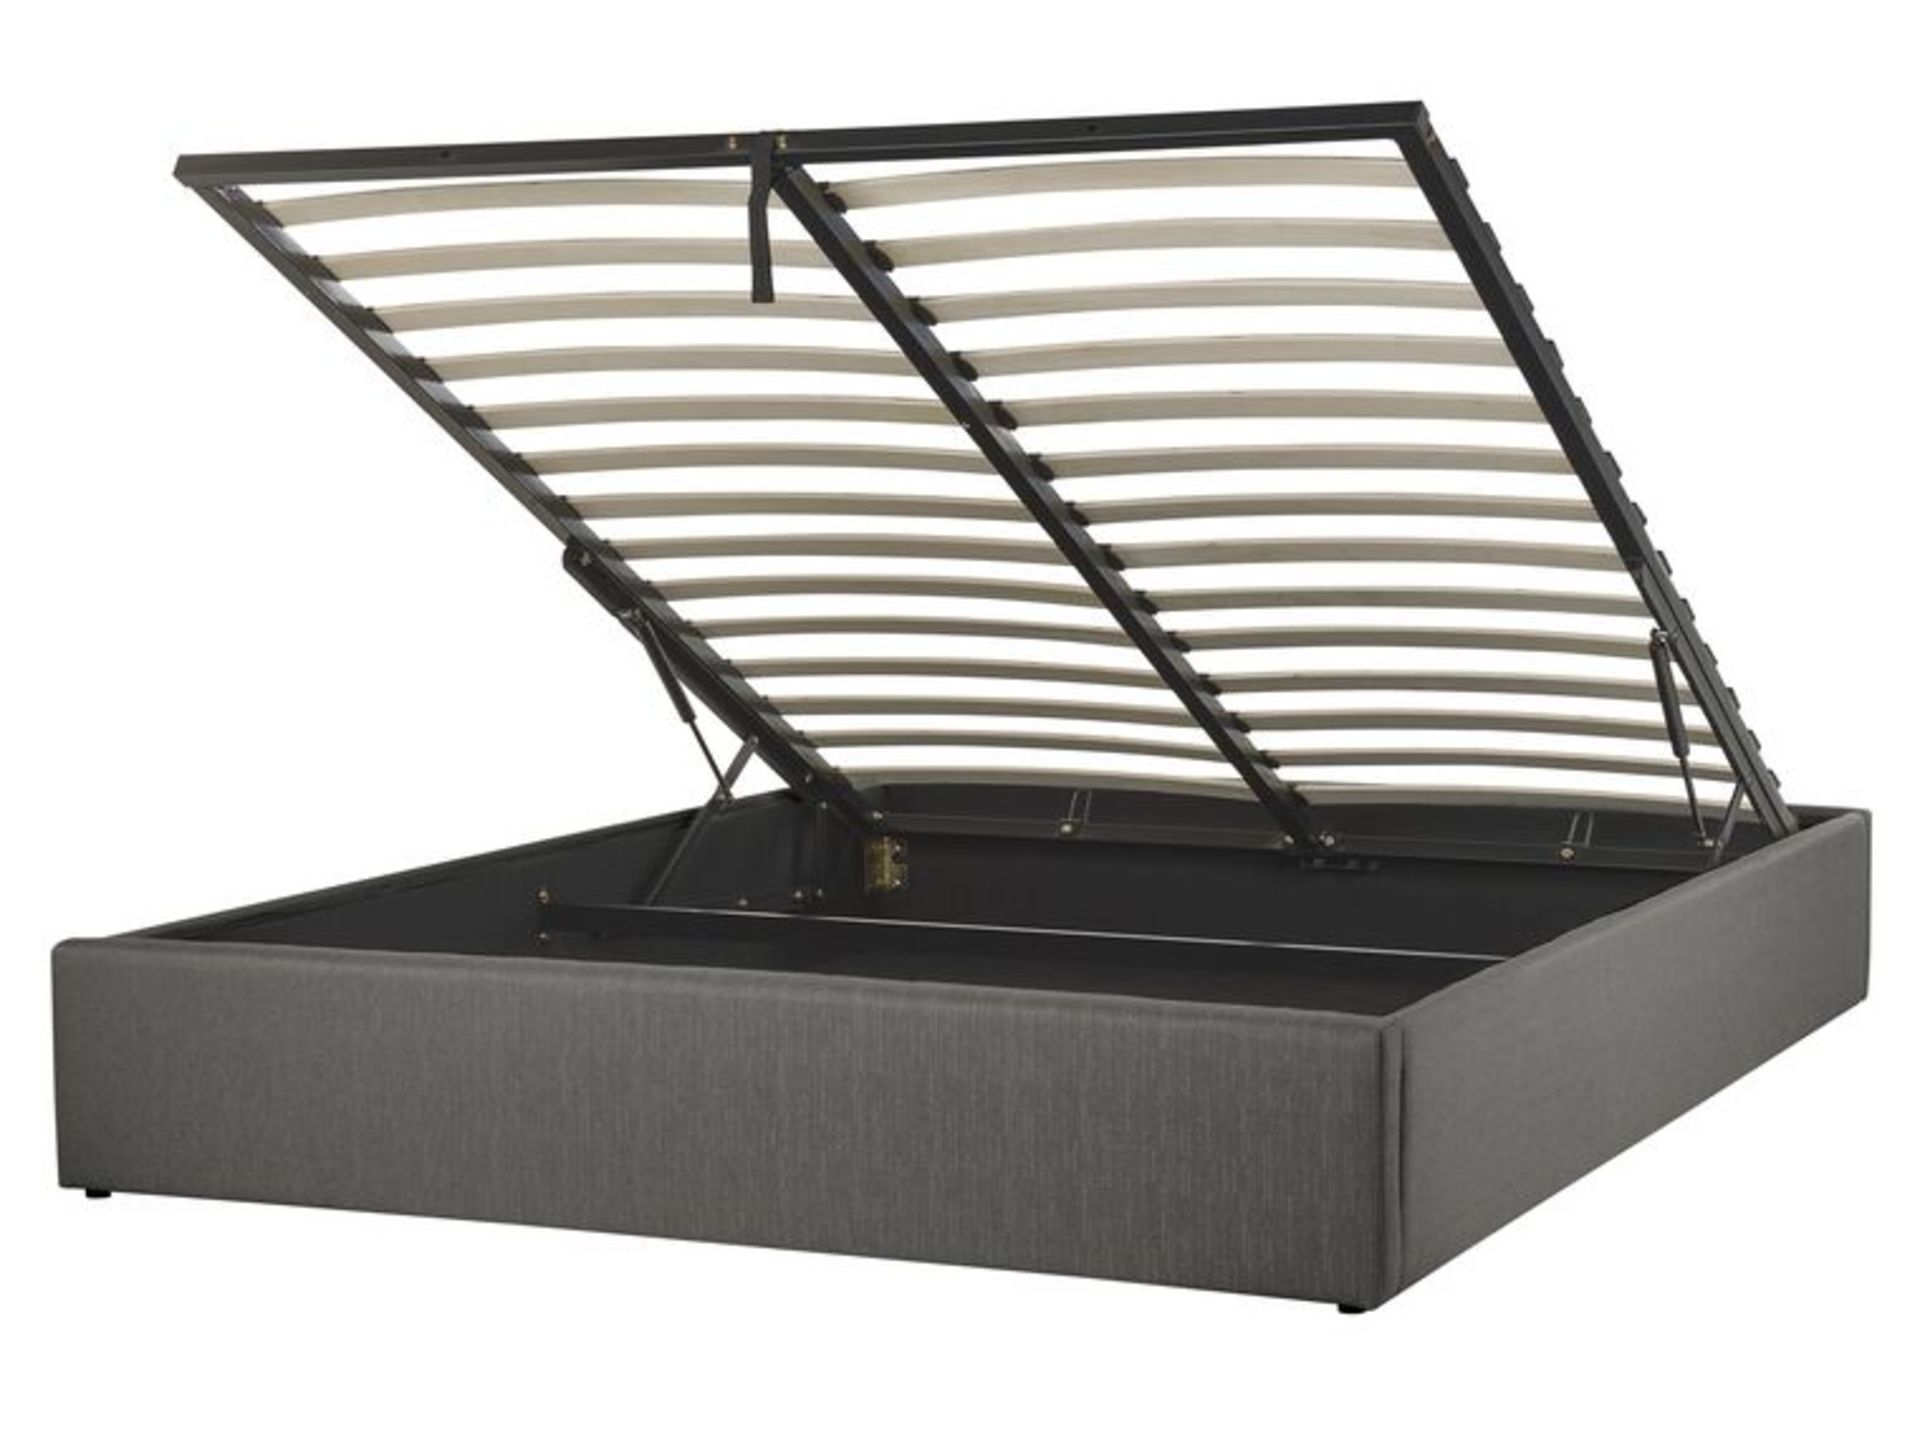 Dinan Fabric EU King Size Ottoman Bed Grey.- SR6. RRP £429.99. Add a stylish vibe to your bedroom - Image 2 of 2